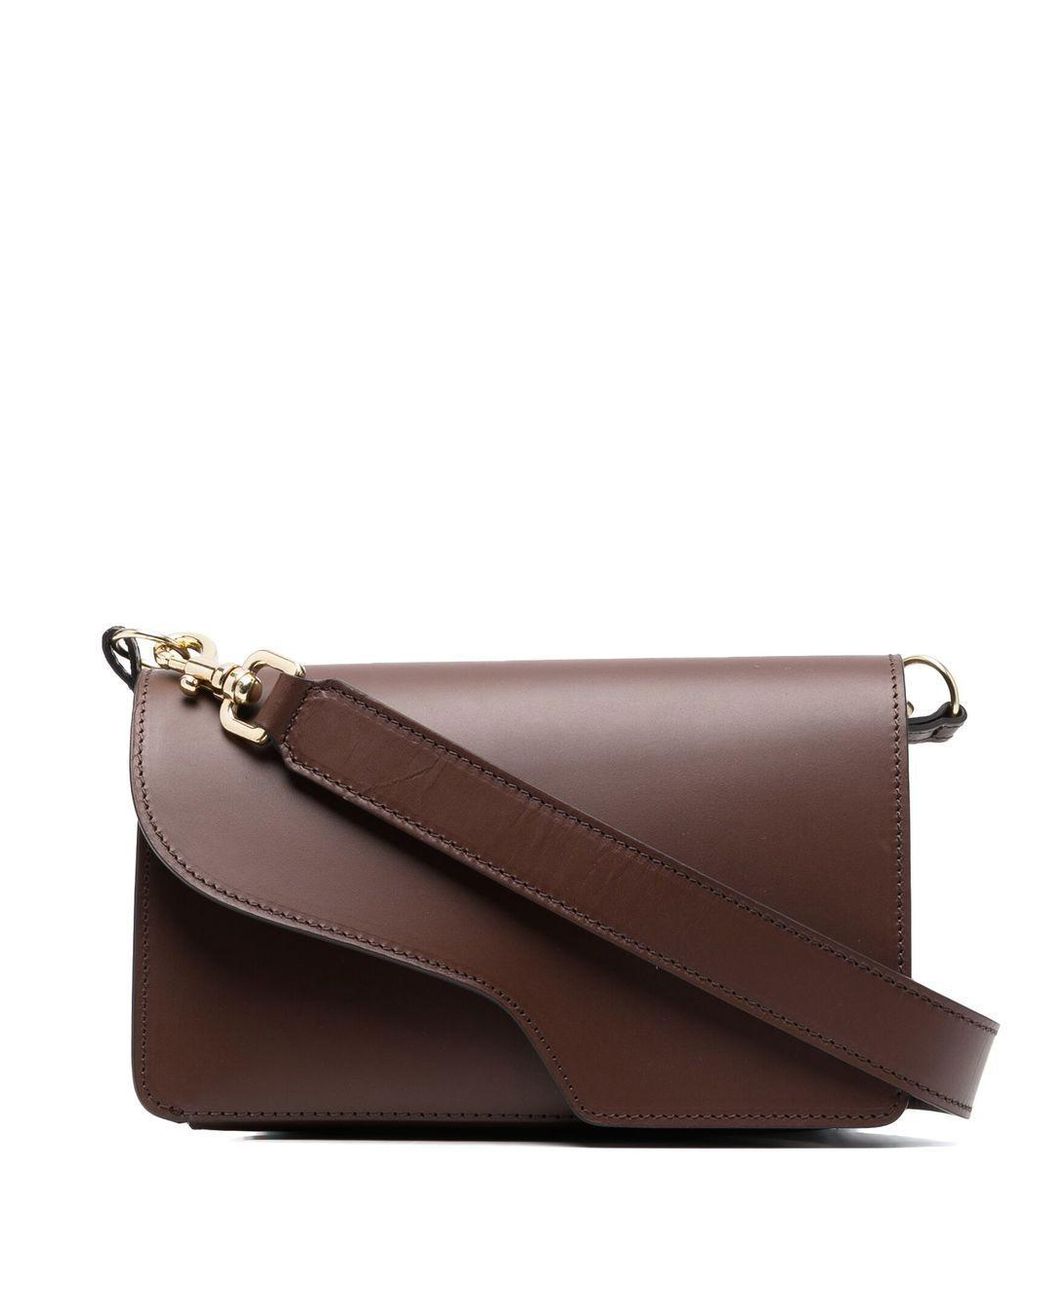 Atp Atelier Assisi Vegetable Tanned Leather Shoulder Bag in Brown | Lyst